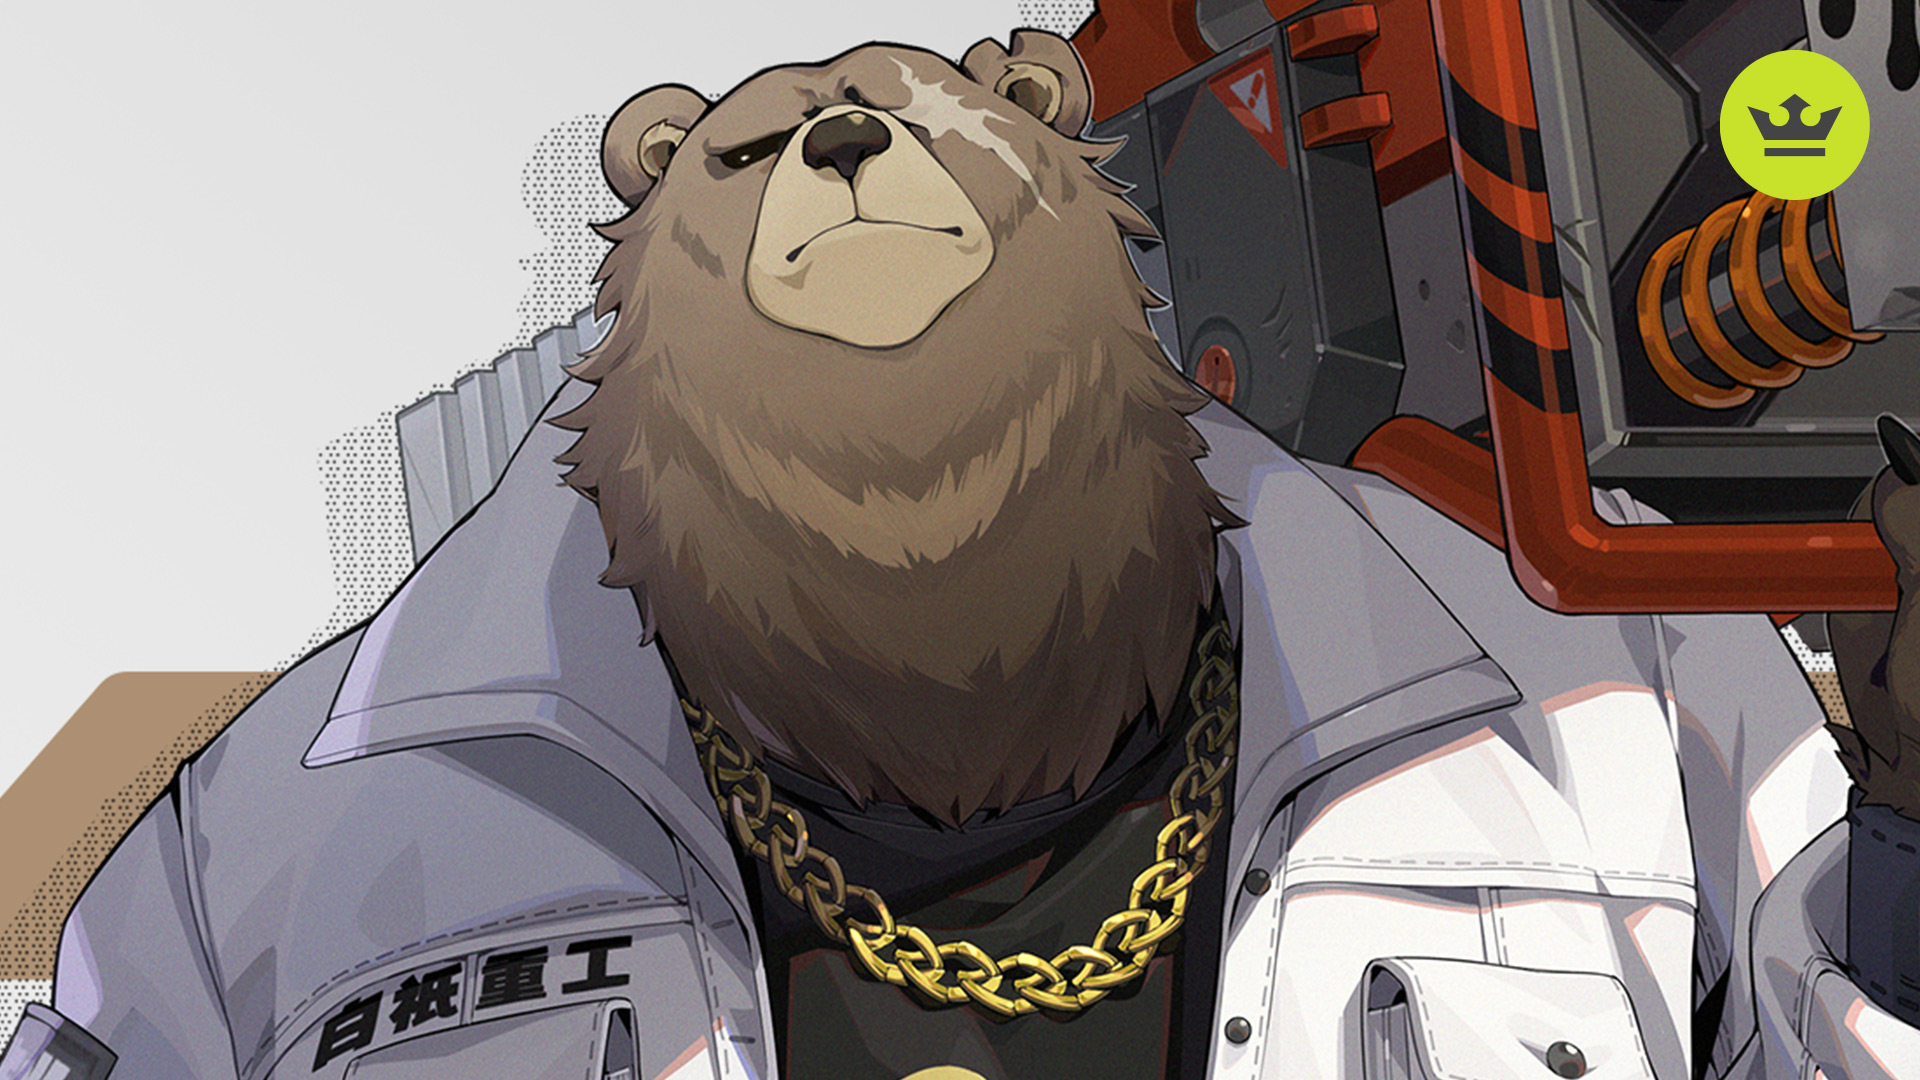 and yes there's a playable beefy bear #zenlesszonezero #zenlesszonezer, Zenless  Zone Zero